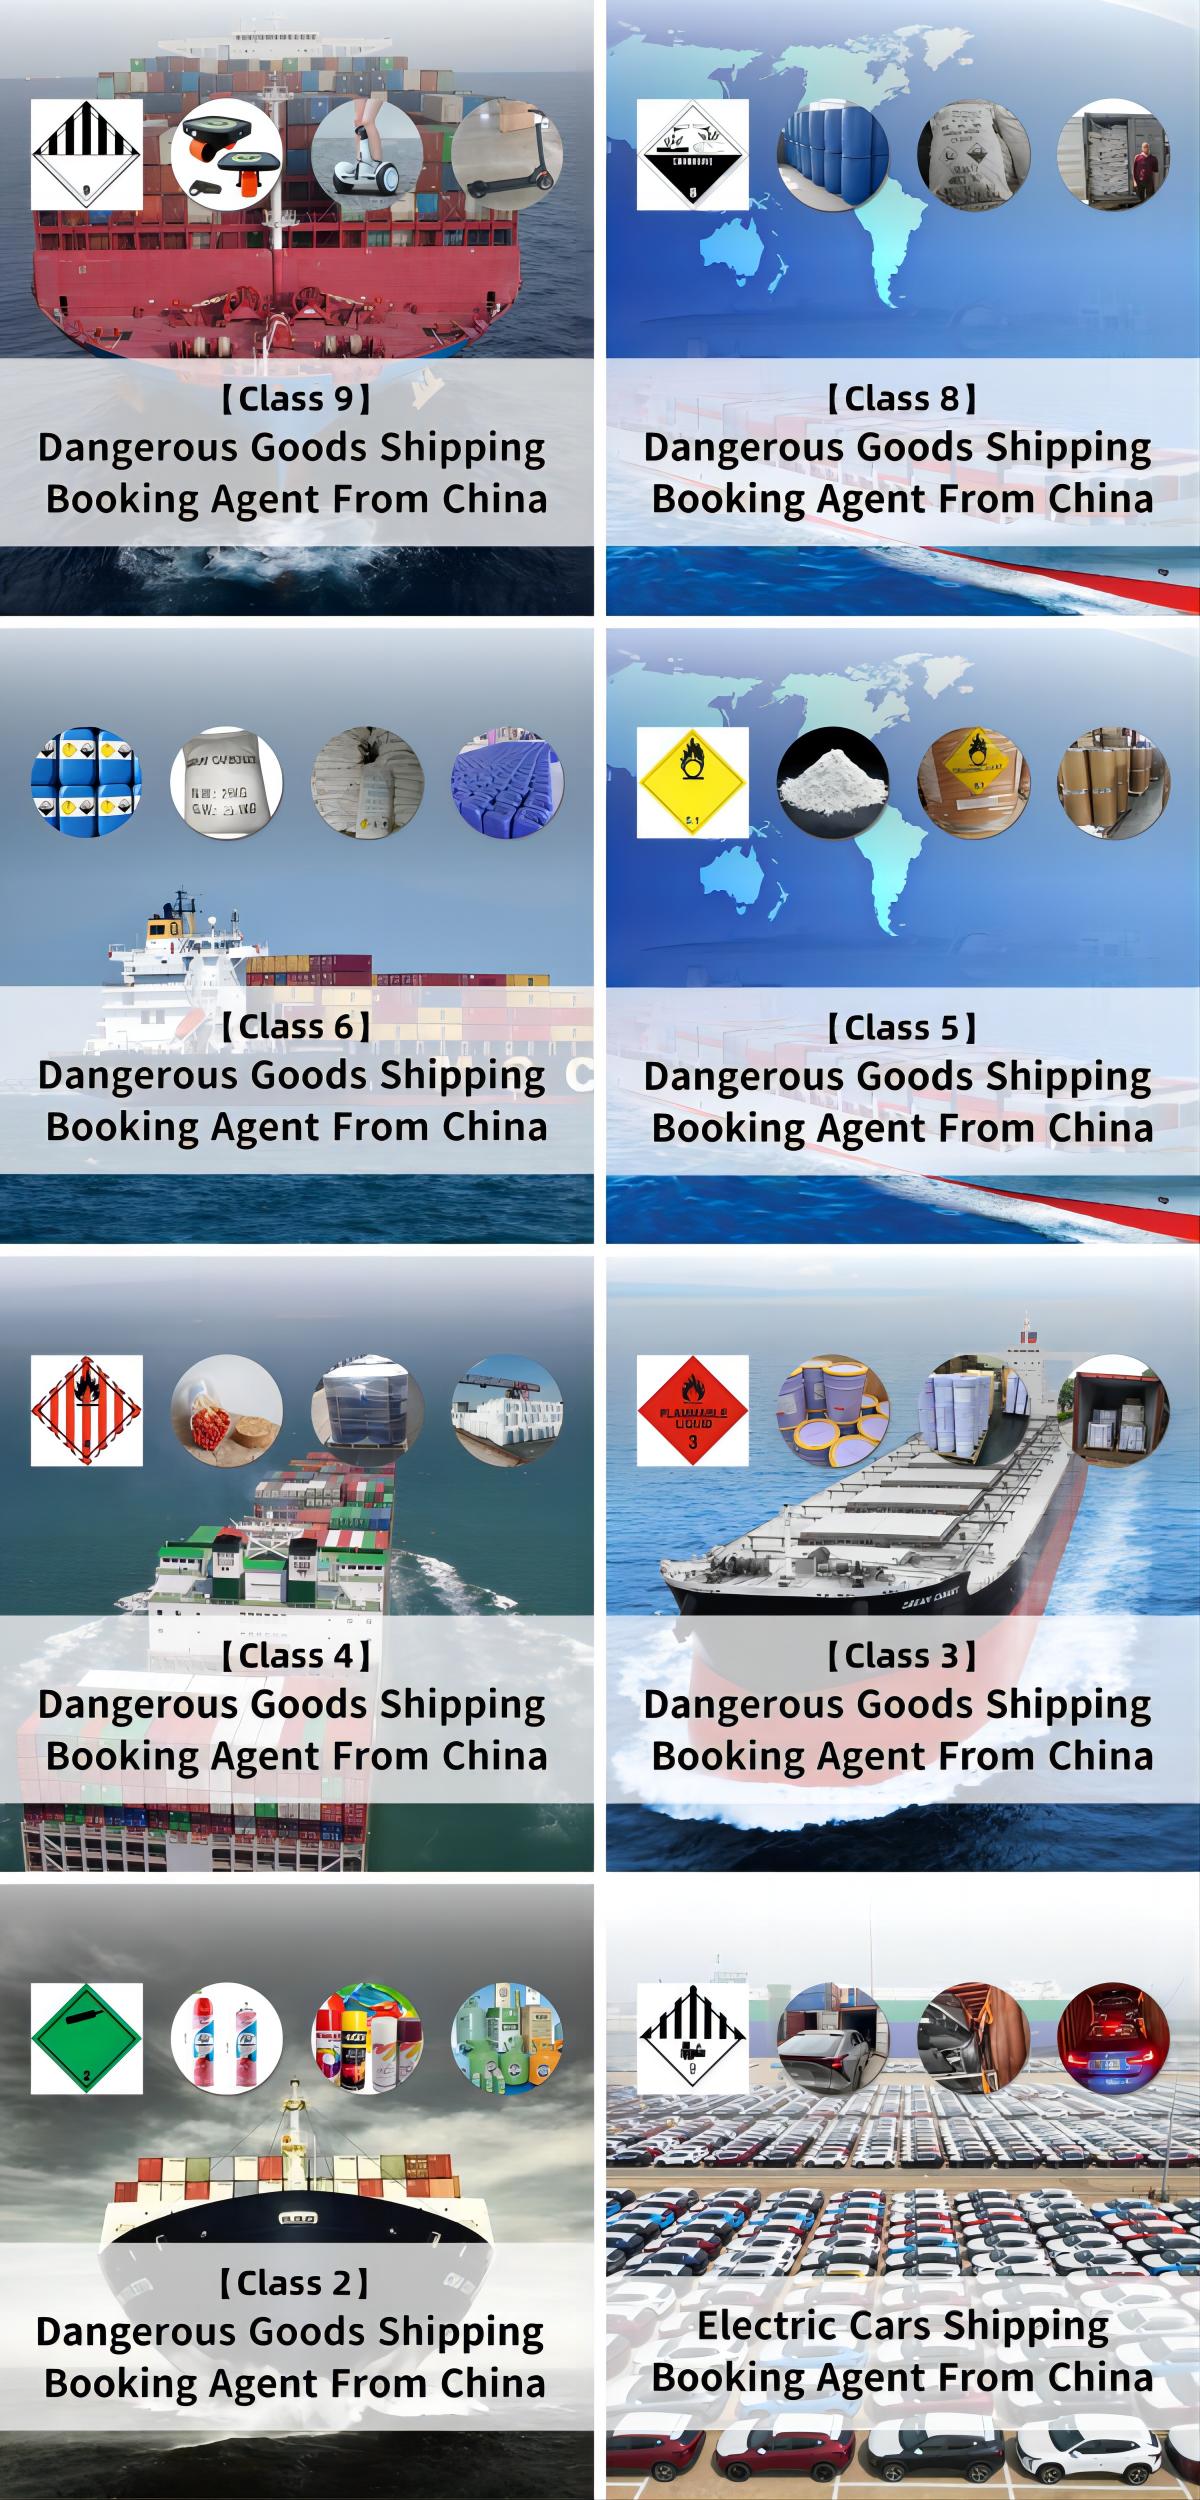 Offering one-stop service for dangerous goods in Shenzhen